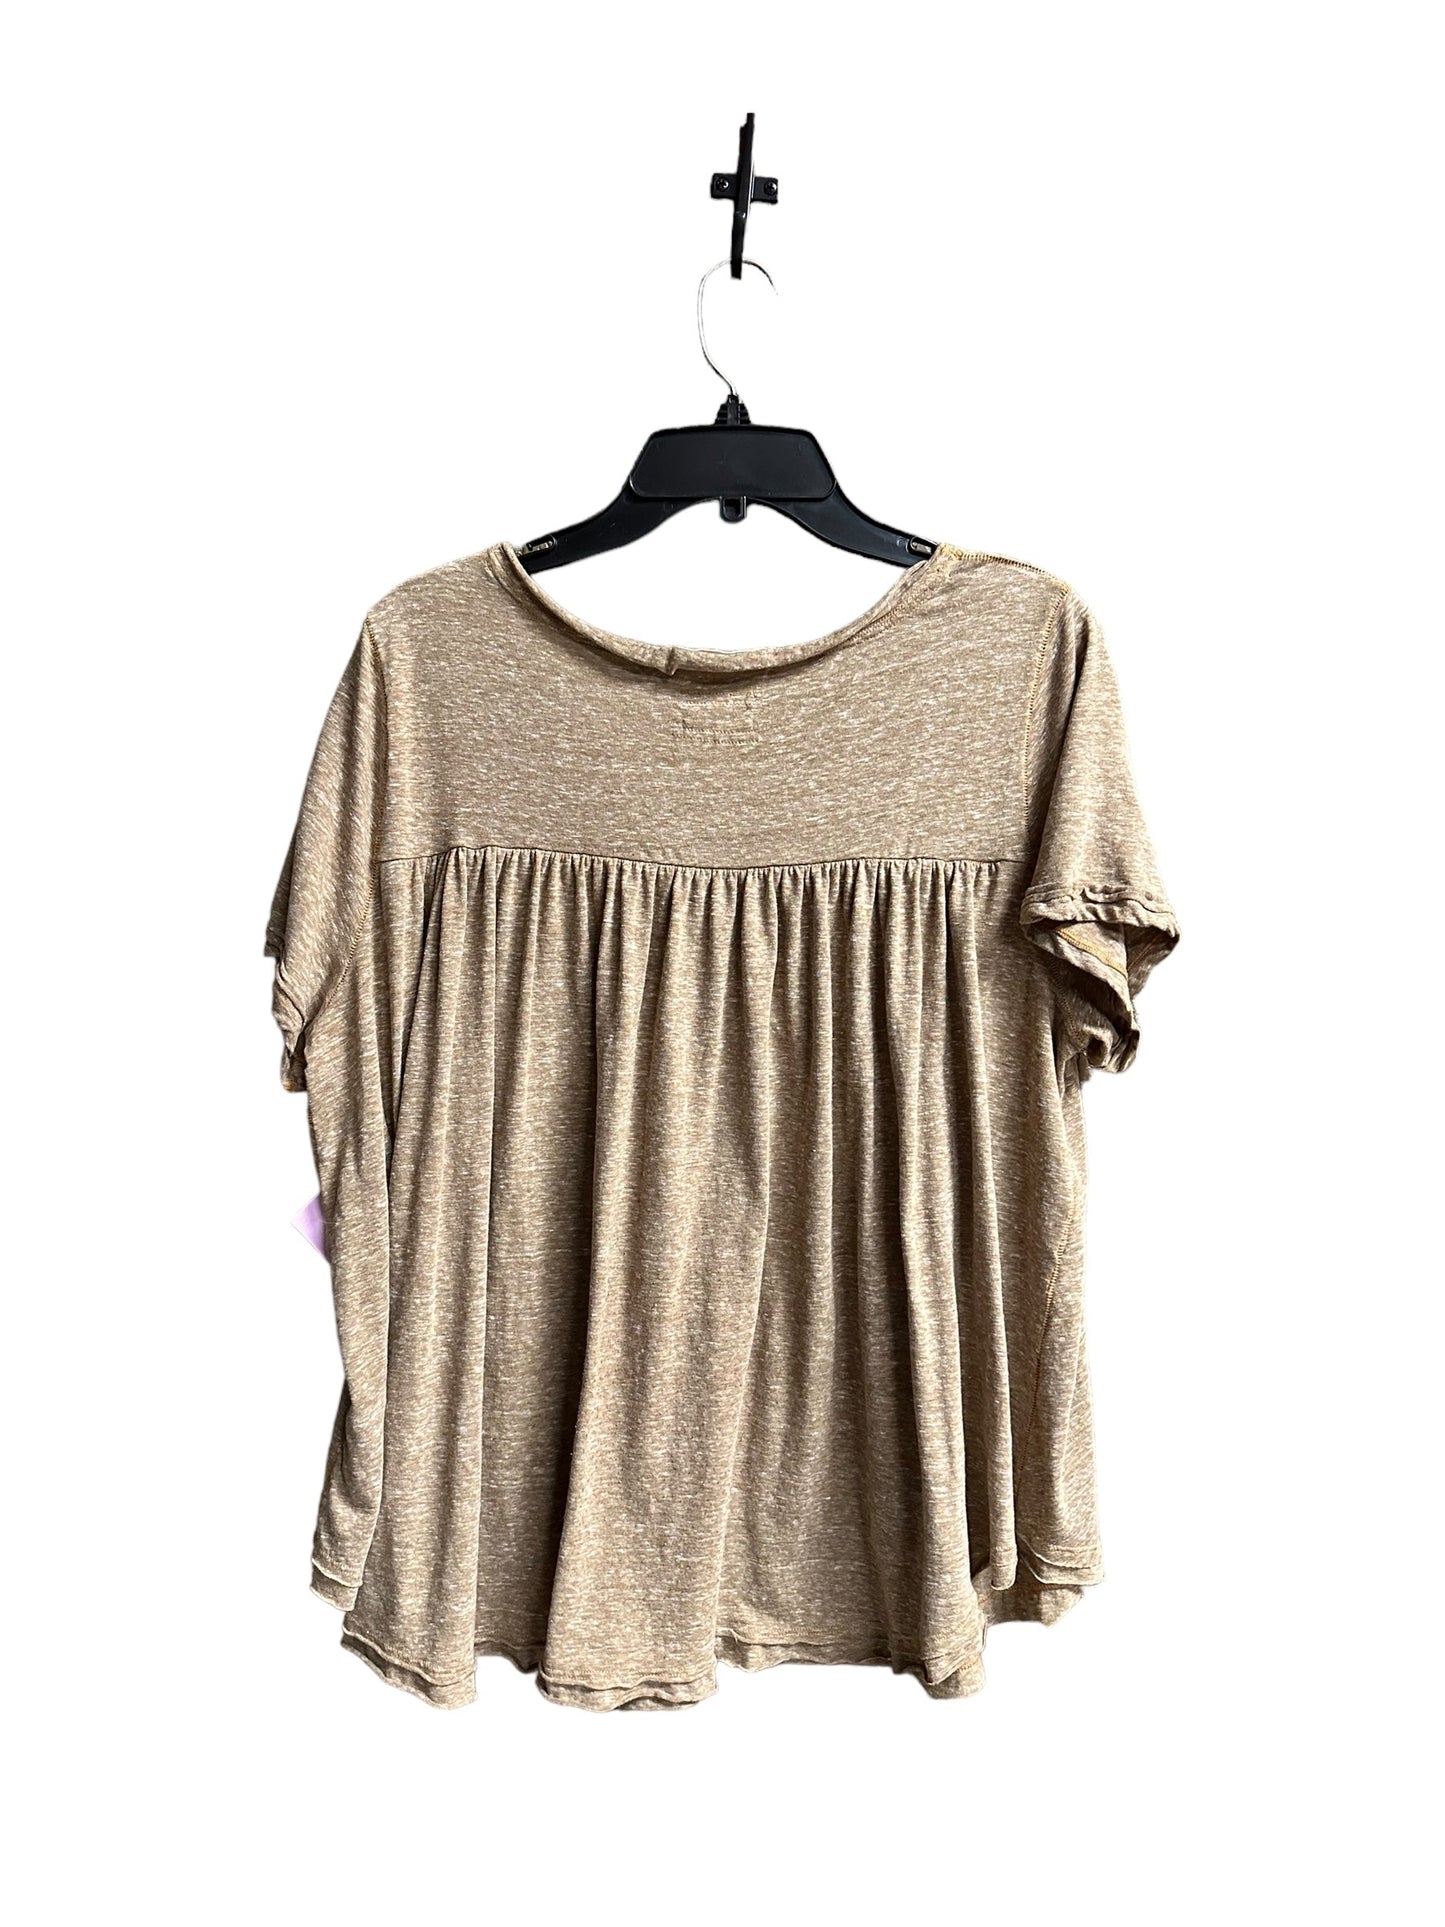 Brown Top Short Sleeve Basic We The Free, Size L